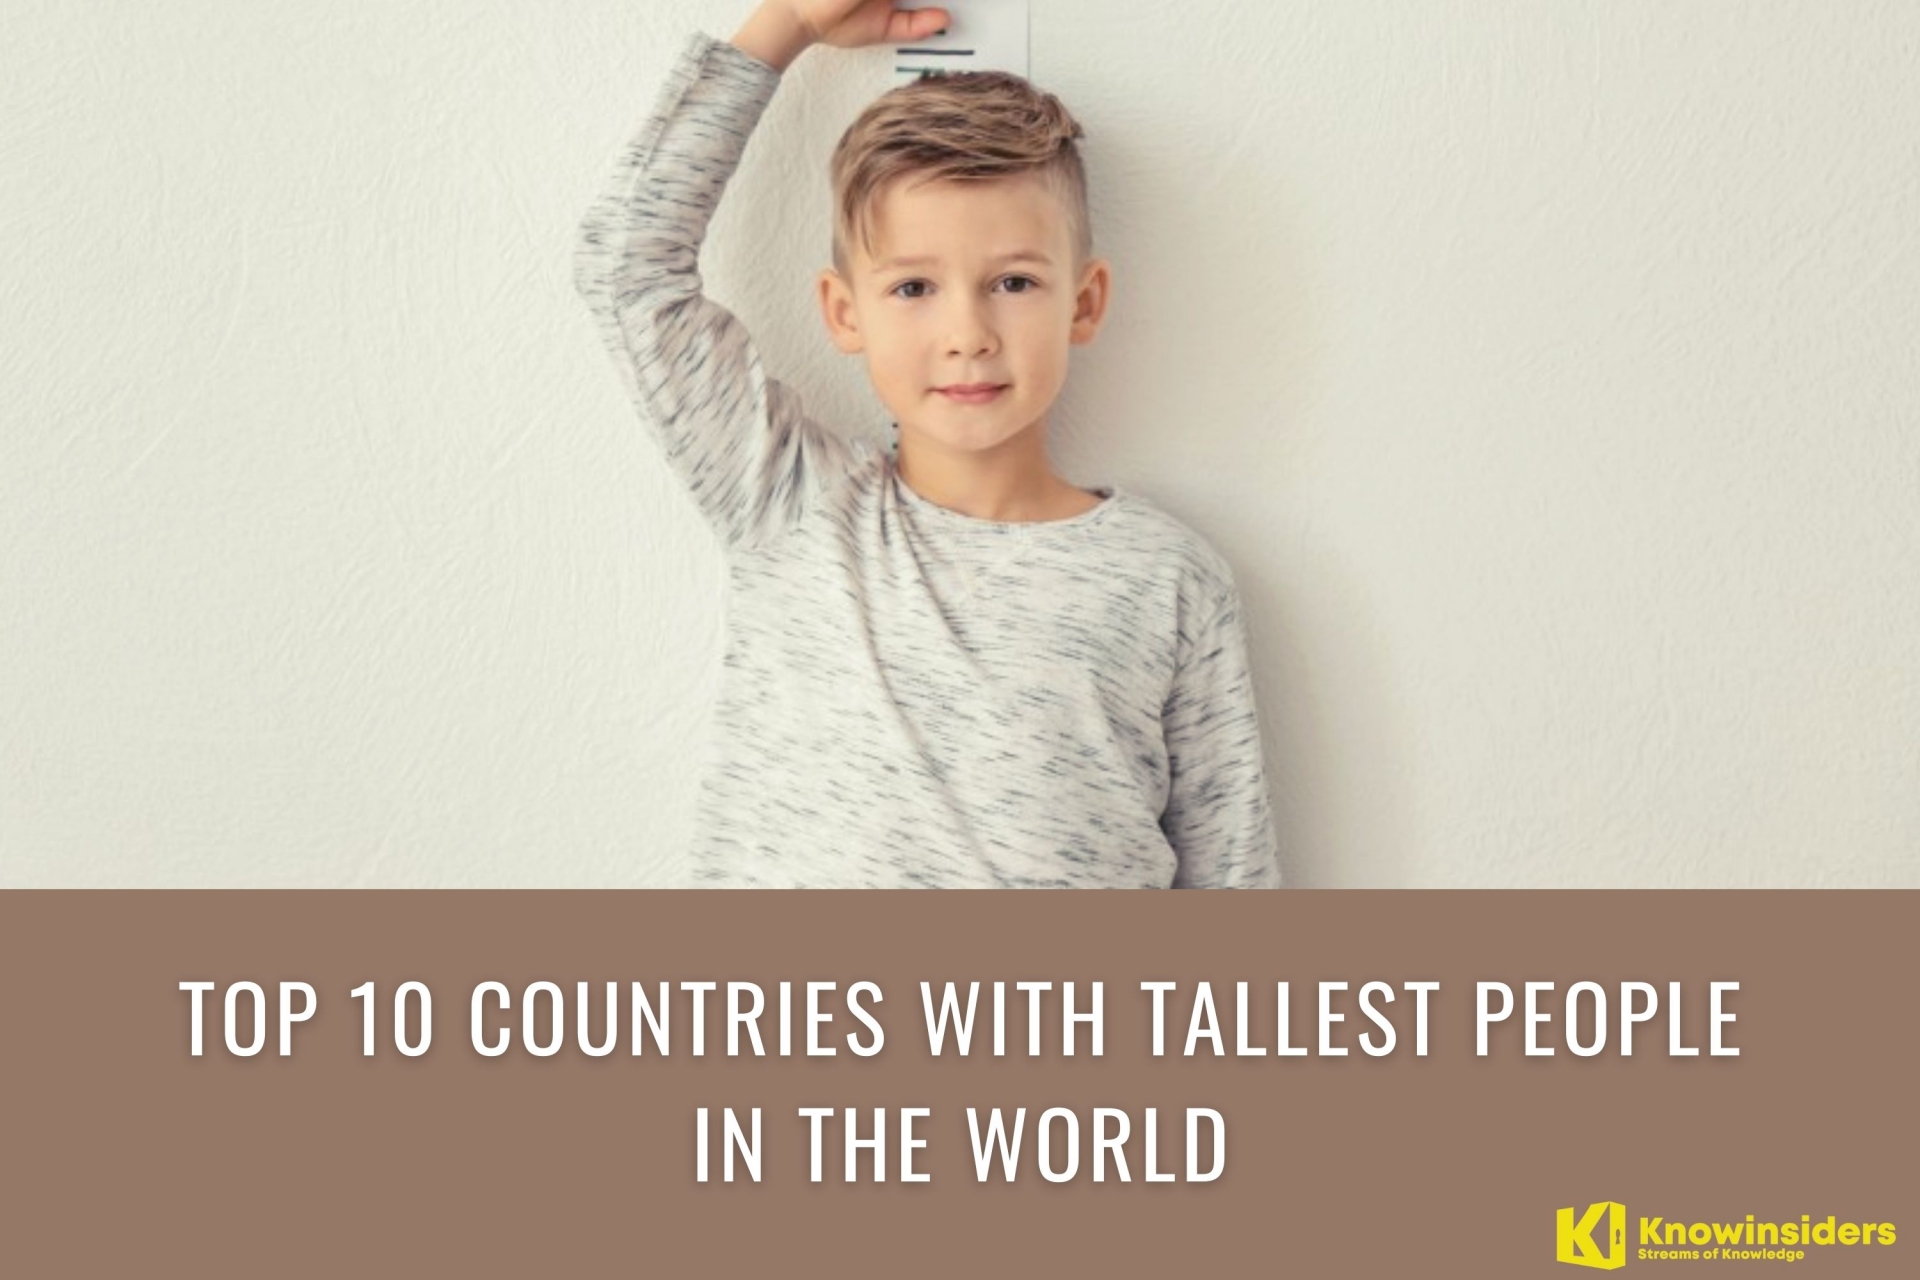 Top 10 Countries With Tallest People in the World